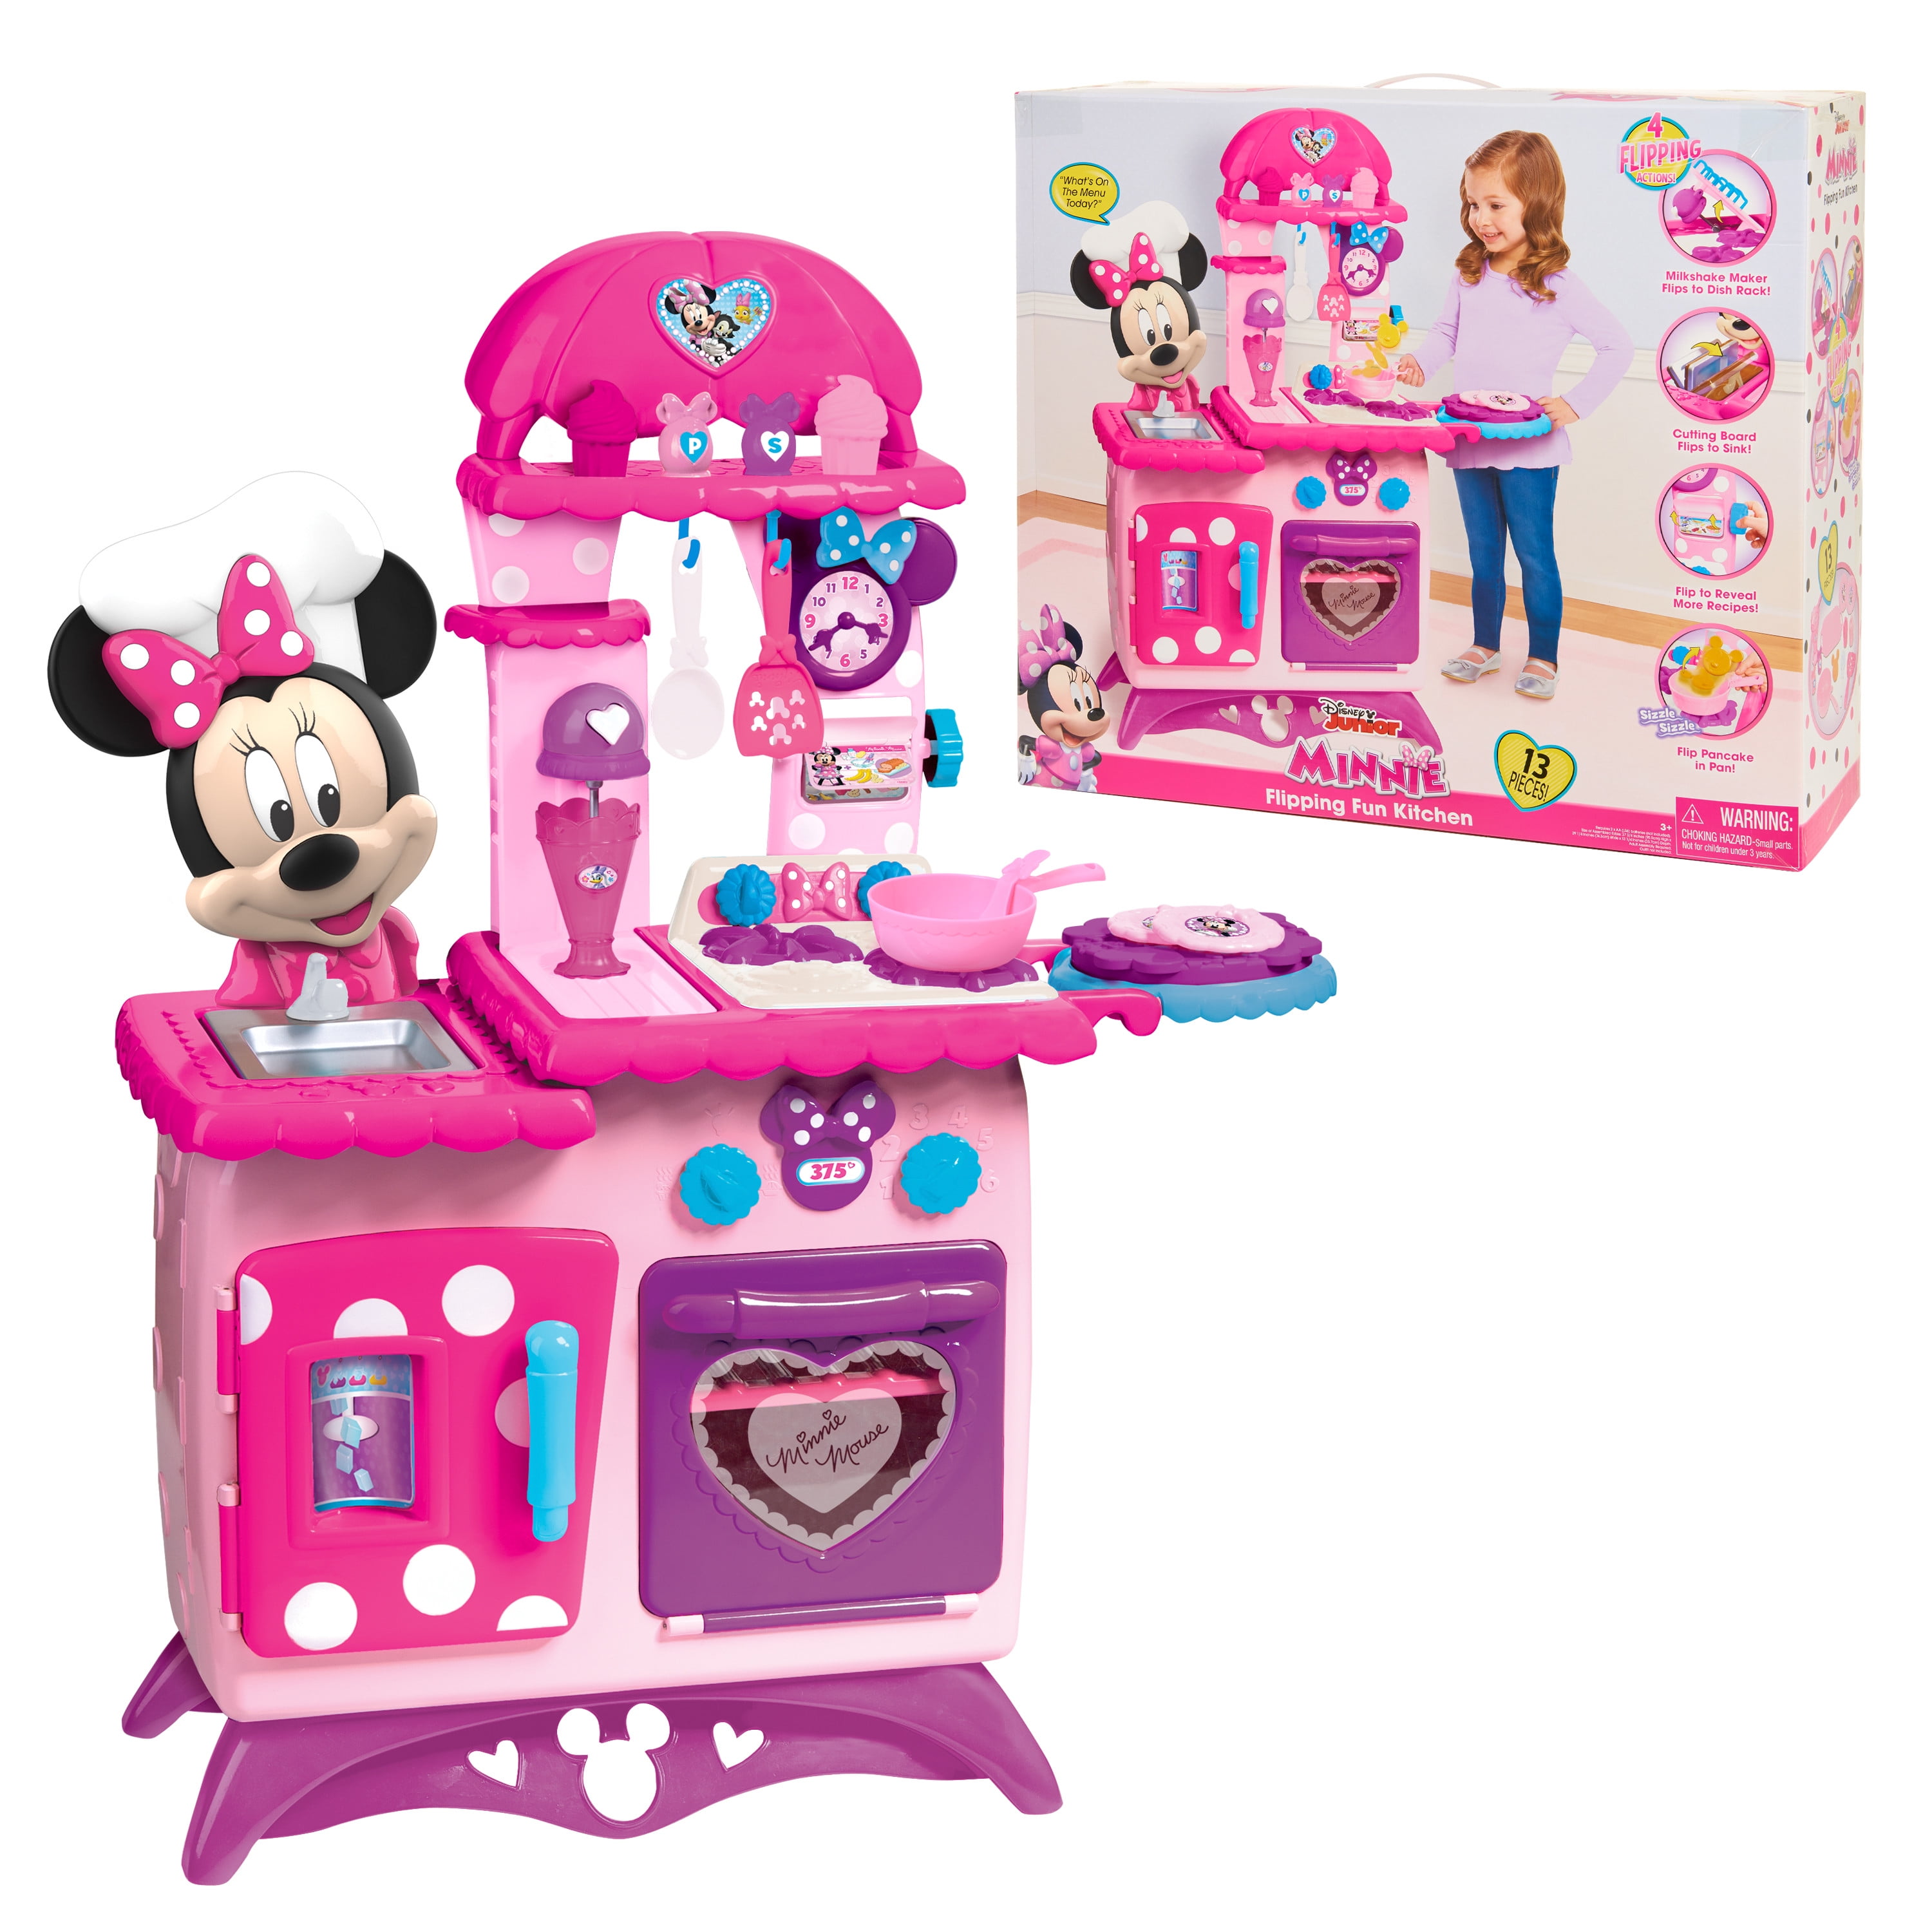 Girl Toys Magic Sink Scrub Play Kitchen Accessories Happy Helpers Minnie Mouse 